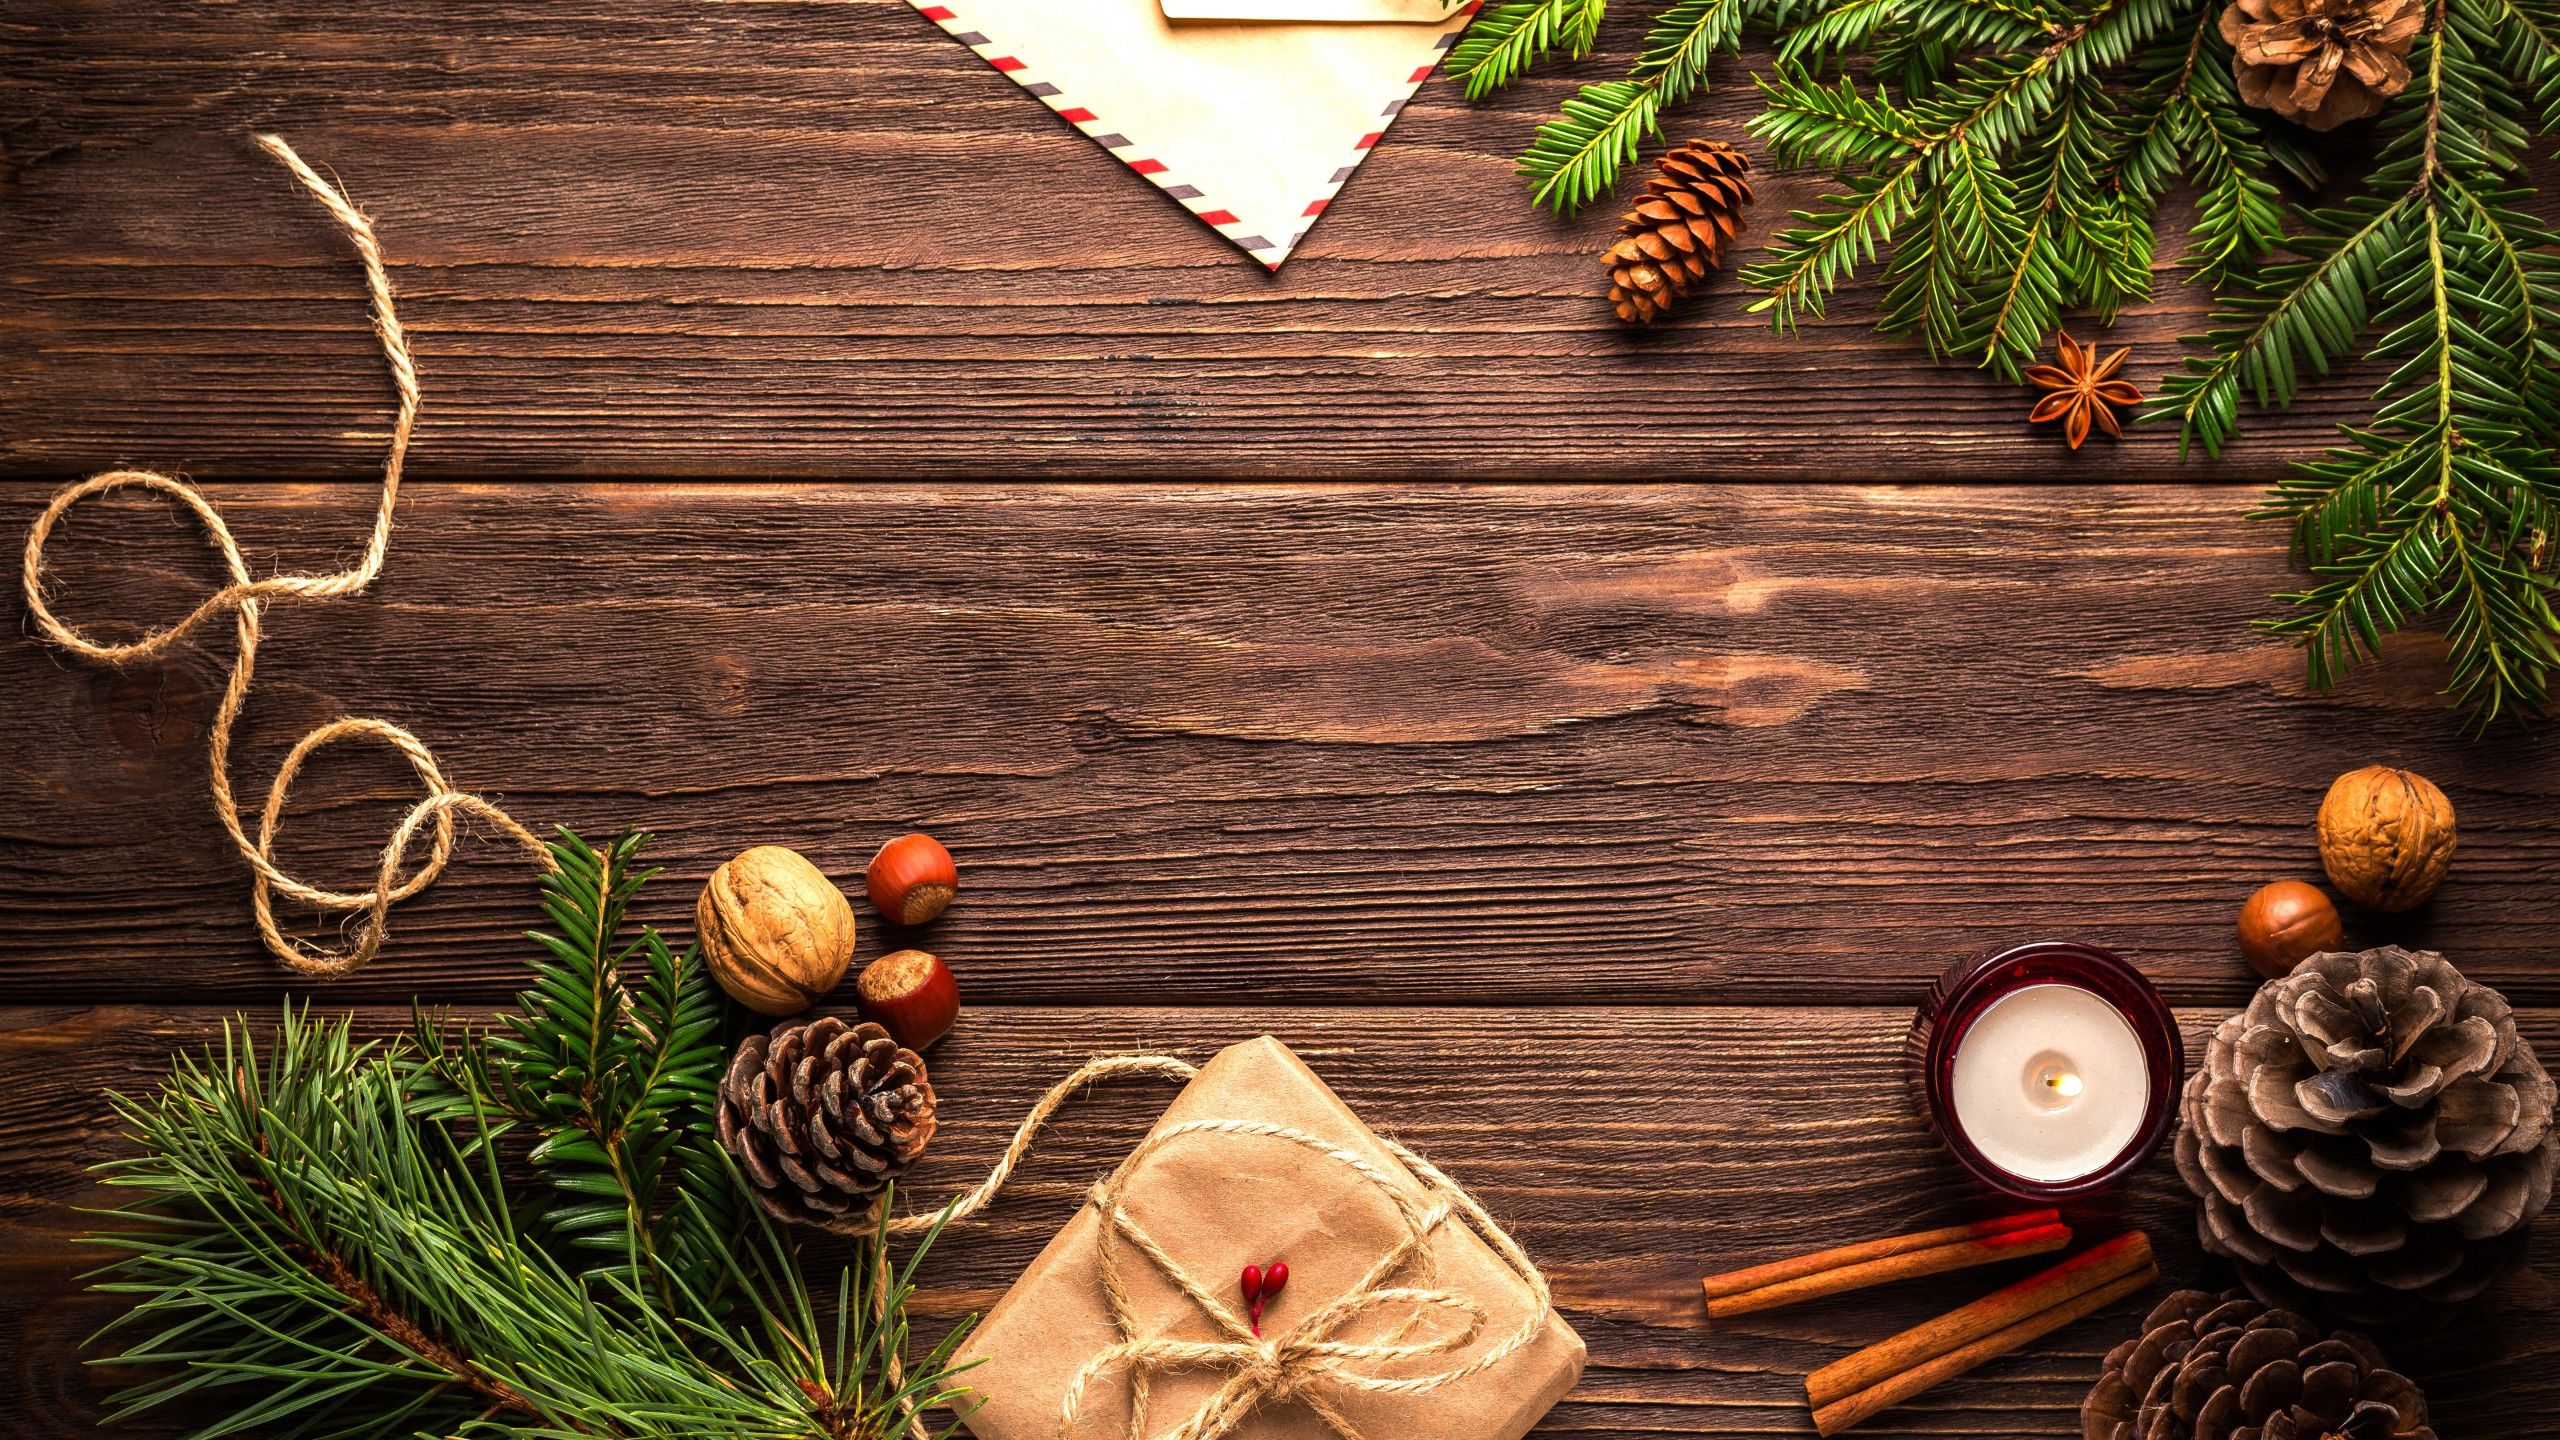 Wallpapers Christmas, New Year, table, fir